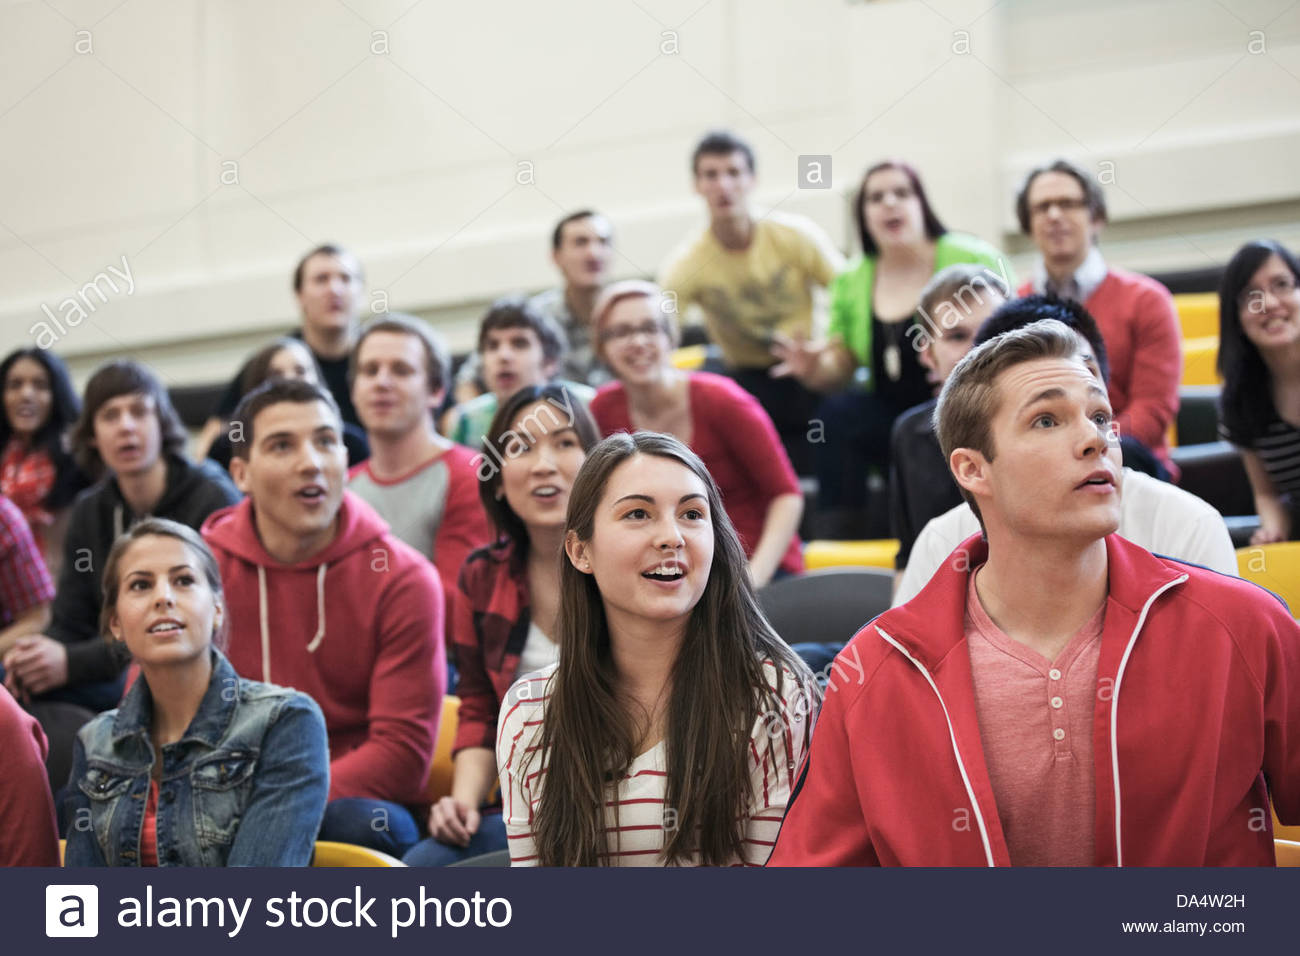 Large group of students watching college sporting event Stock Photo